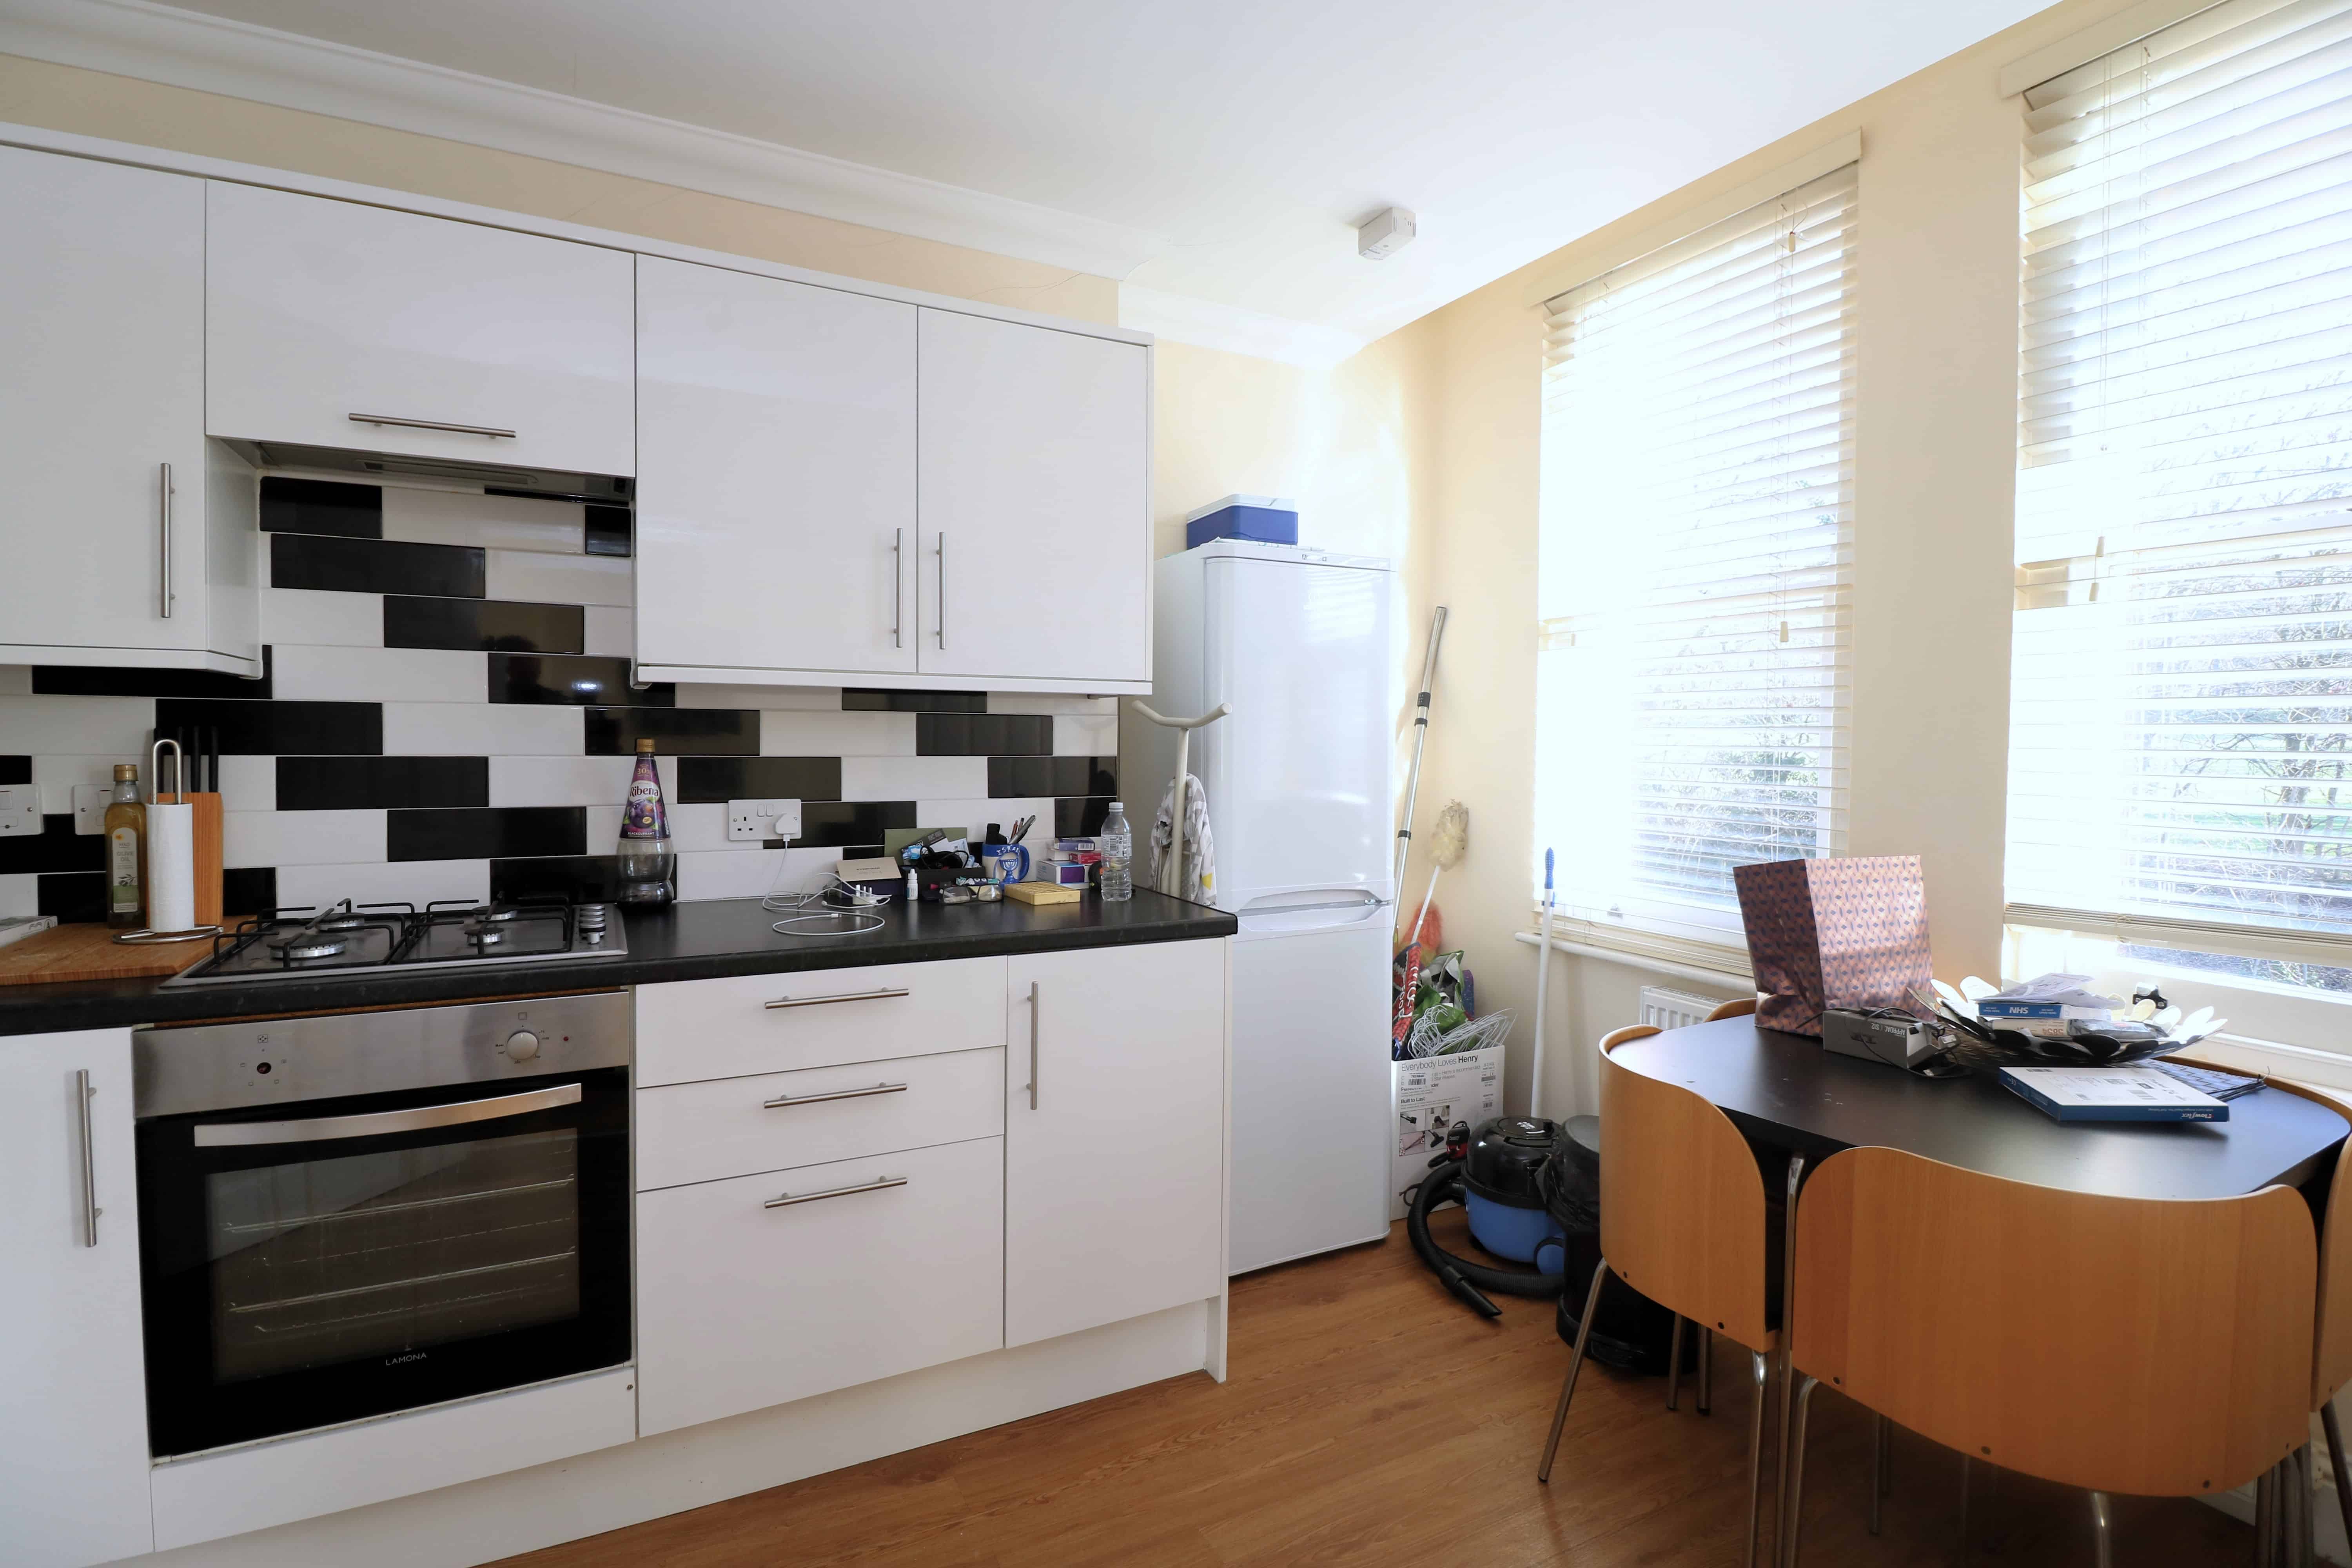 Excellent top floor split level two double bedroom flat, bright and spacious in Mill Hill, NW7